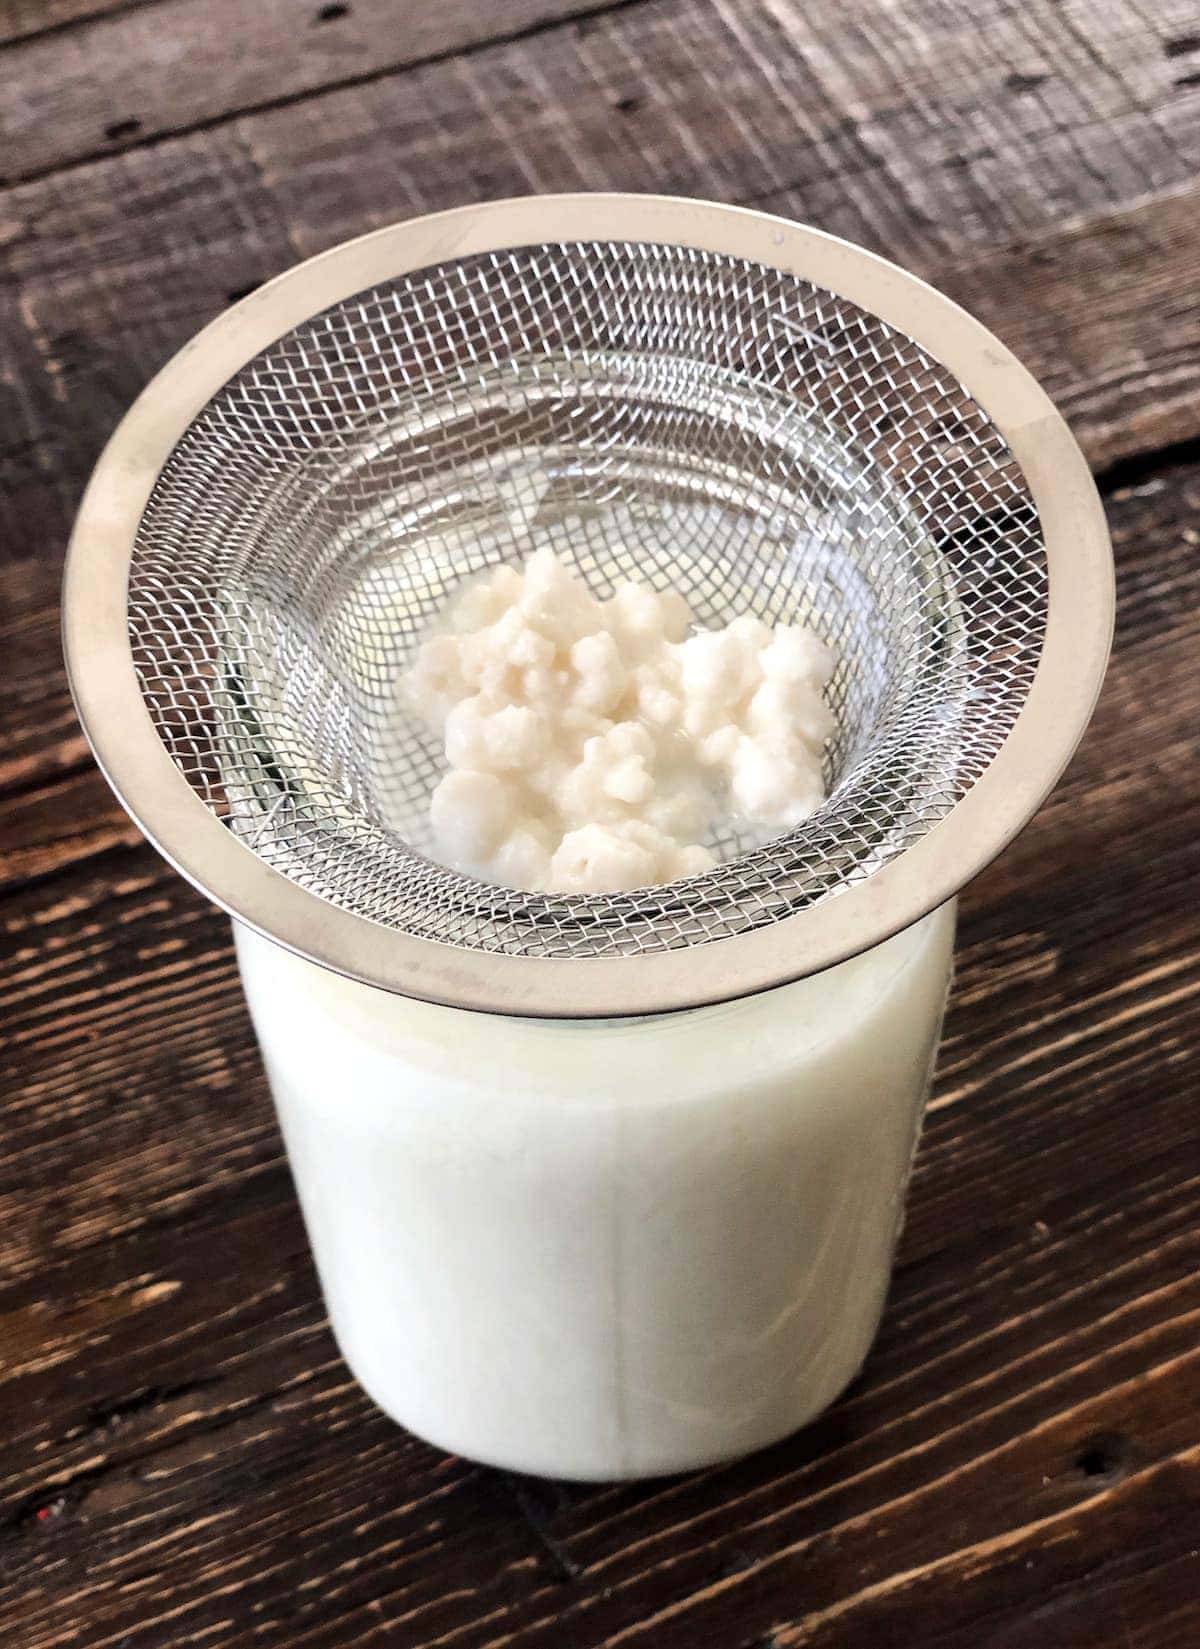 How Long Can Milk Be Left Out?